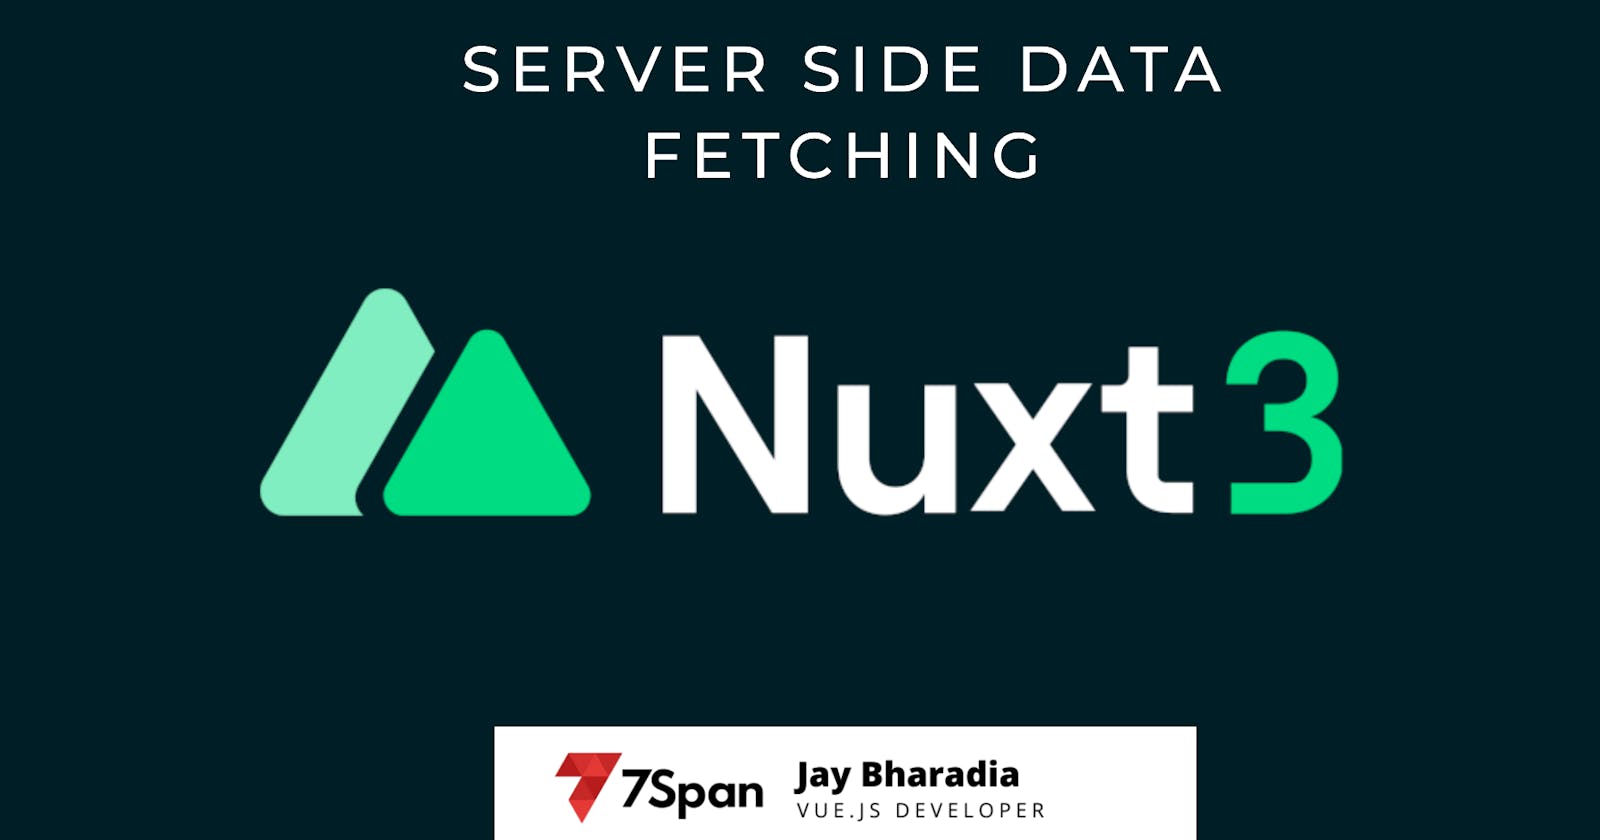 Deep Dive into Nuxt 3 Server Side Data Fetching: Handling the Contextual Error with Composables